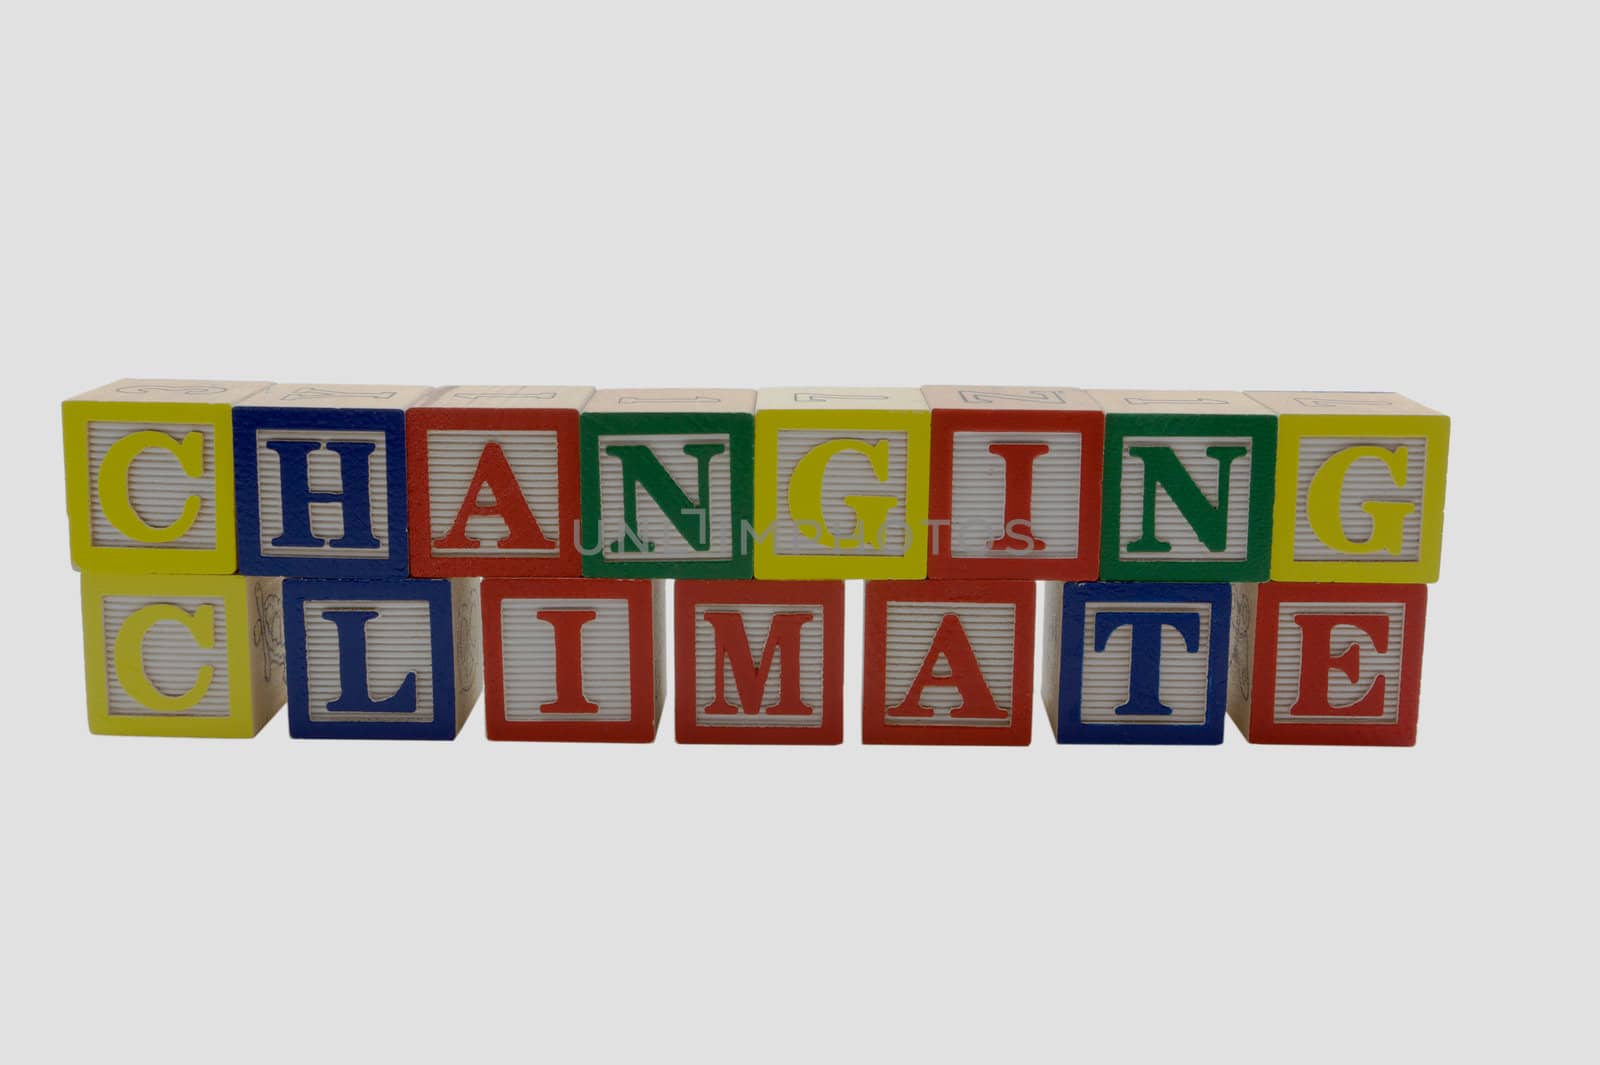 Wood Alphabet blocks spelling Changing climate